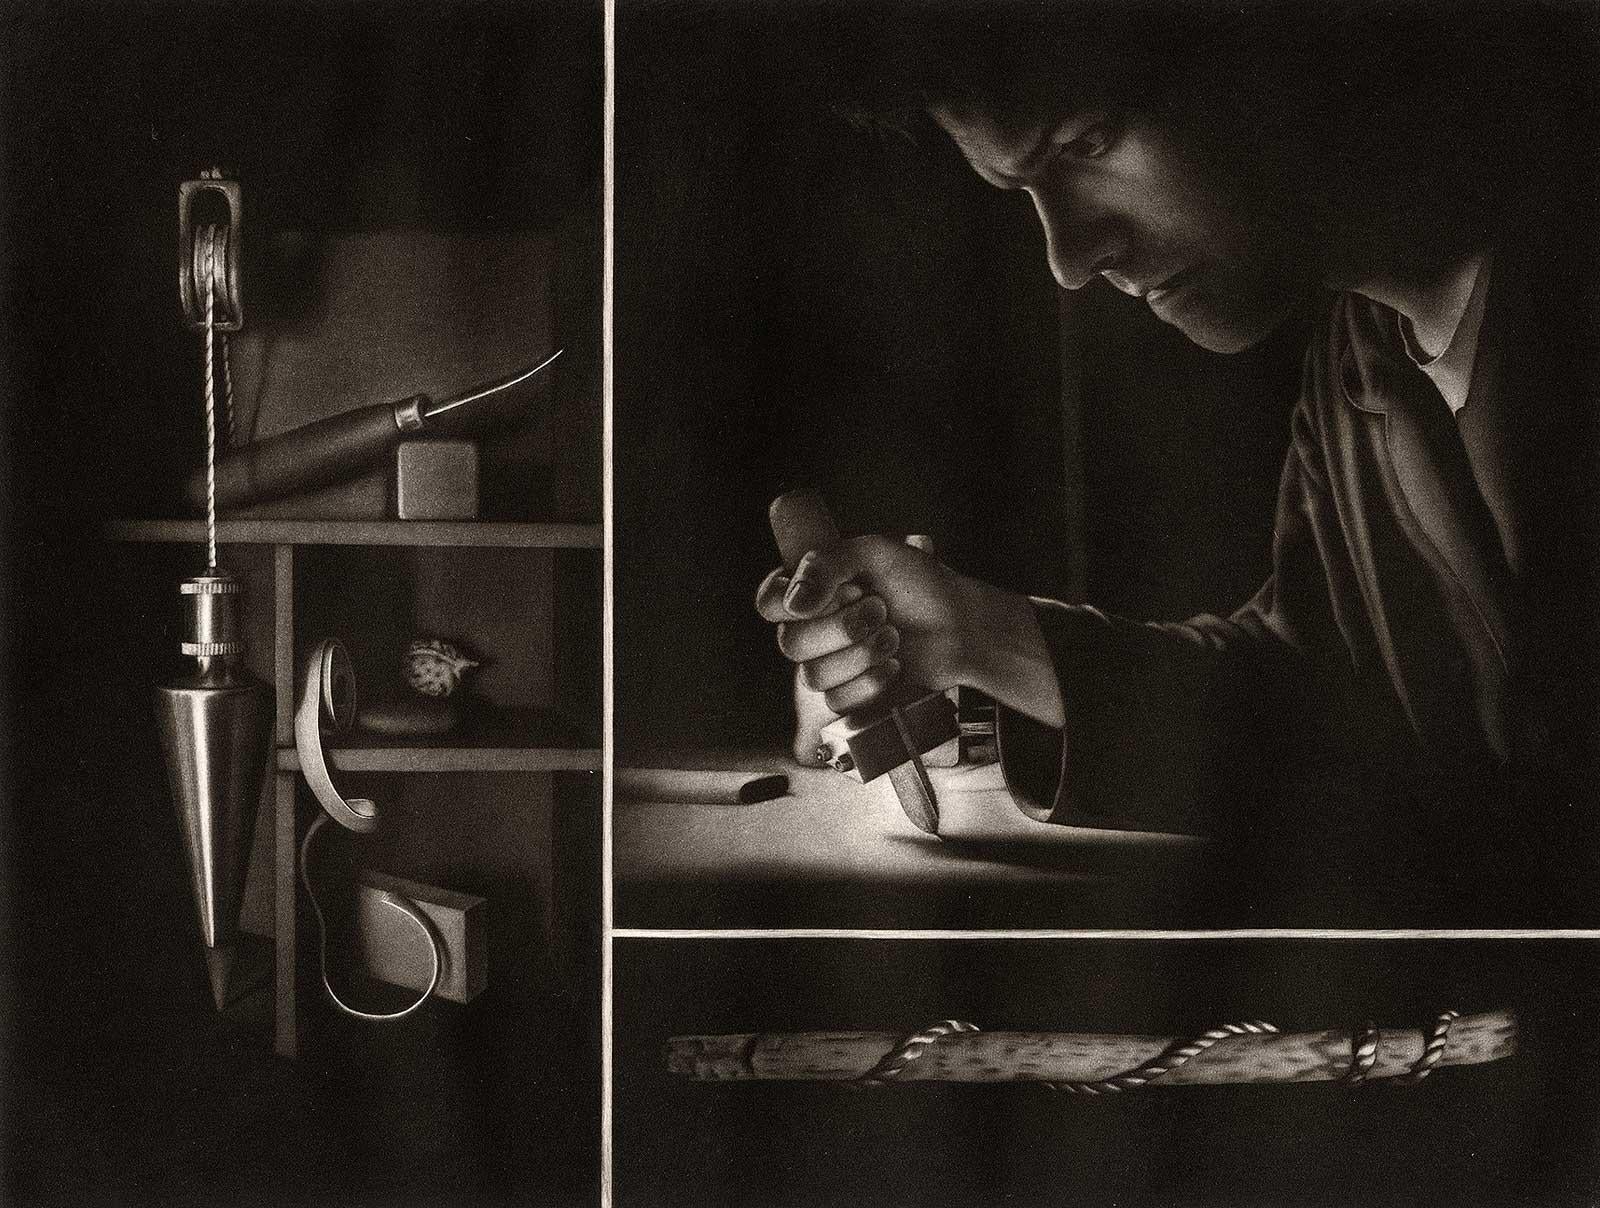 Francisco Souto Portrait Print - Settling II Homage to the Mezzotint (Self Portrait of Artist with his Tools)